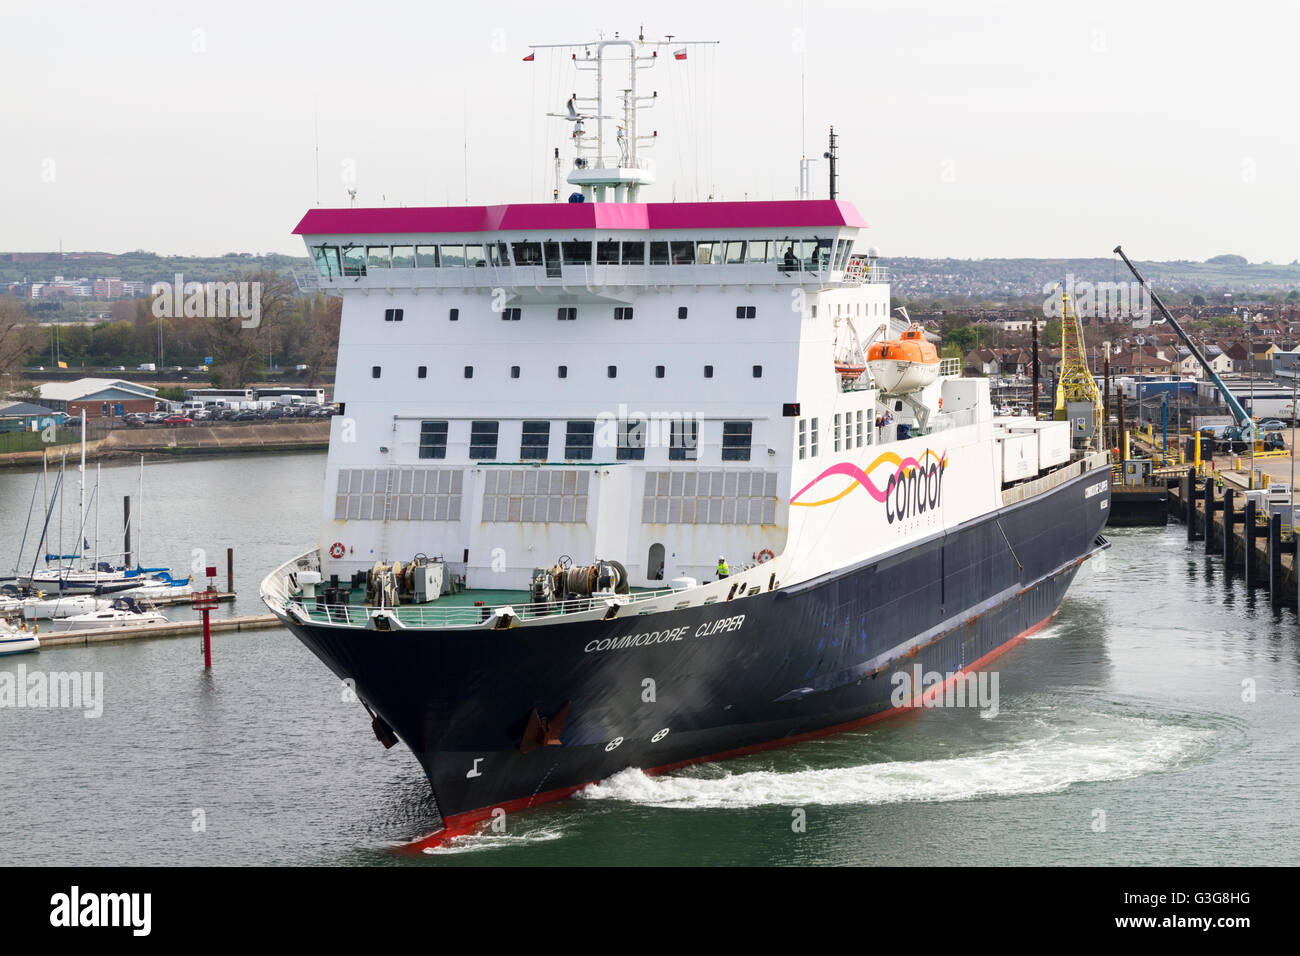 The Condor ferry named the Commodore Clipper leaving port Stock Photo